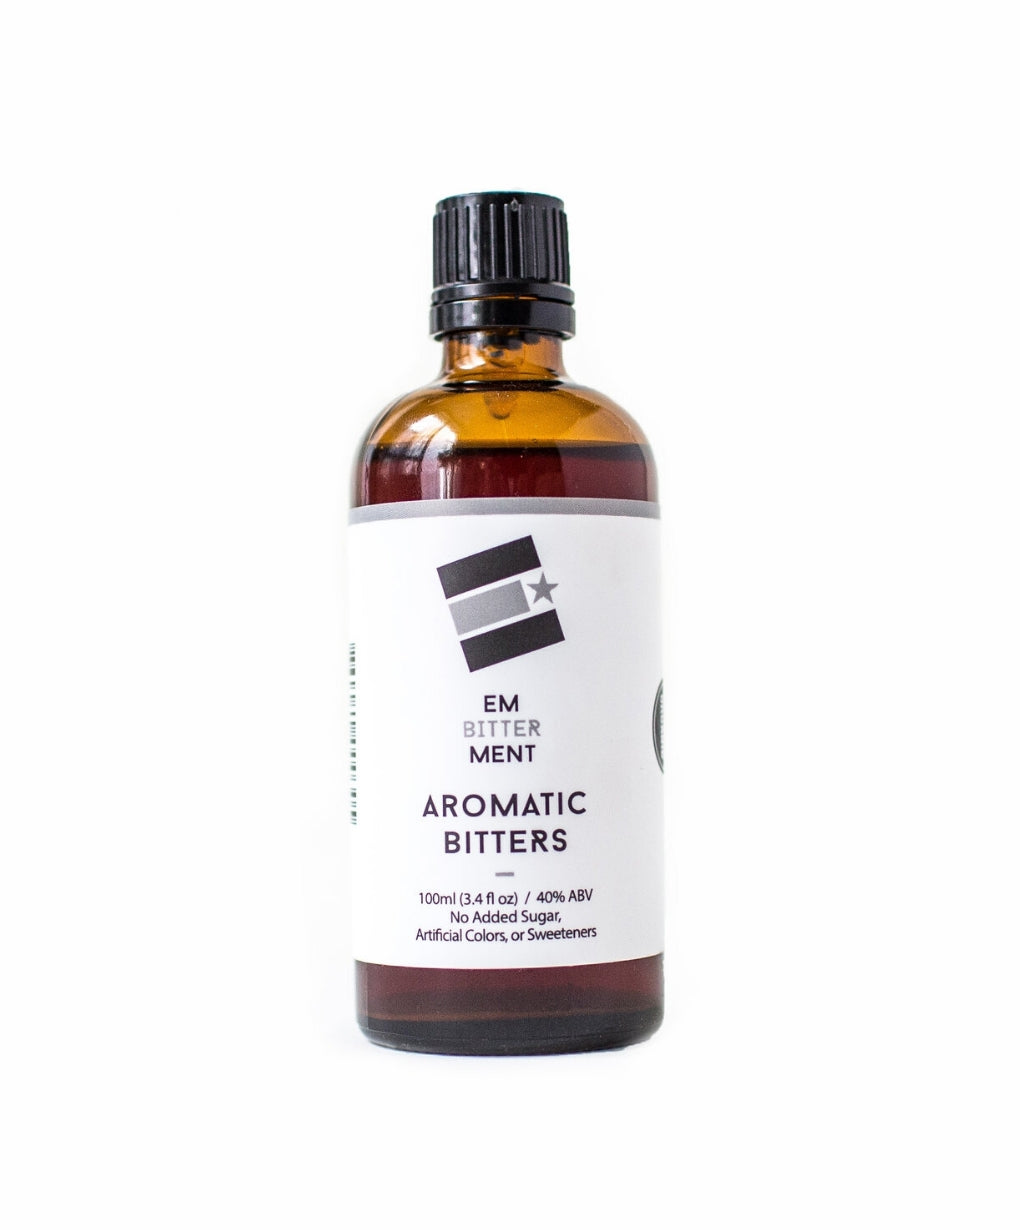 Aromatic Bitters by Embitterment